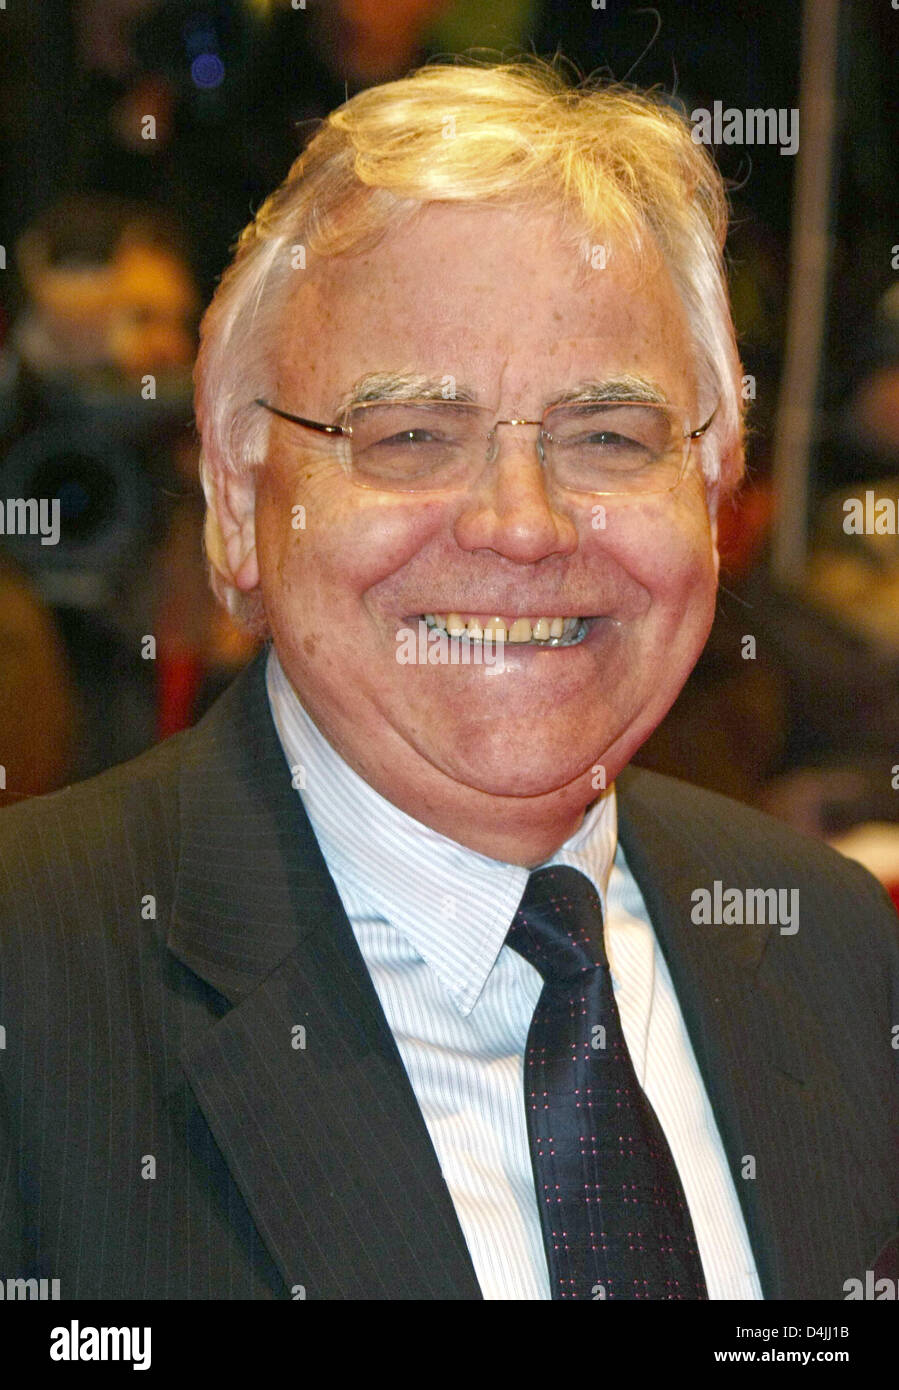 Producer Bill Kenwright arrives at the premiere of ?Cheri? during the 59th Berlin International Film Festival in Berlin, Germany, 10 February 2009. Photo: Hubert Boesl Stock Photo